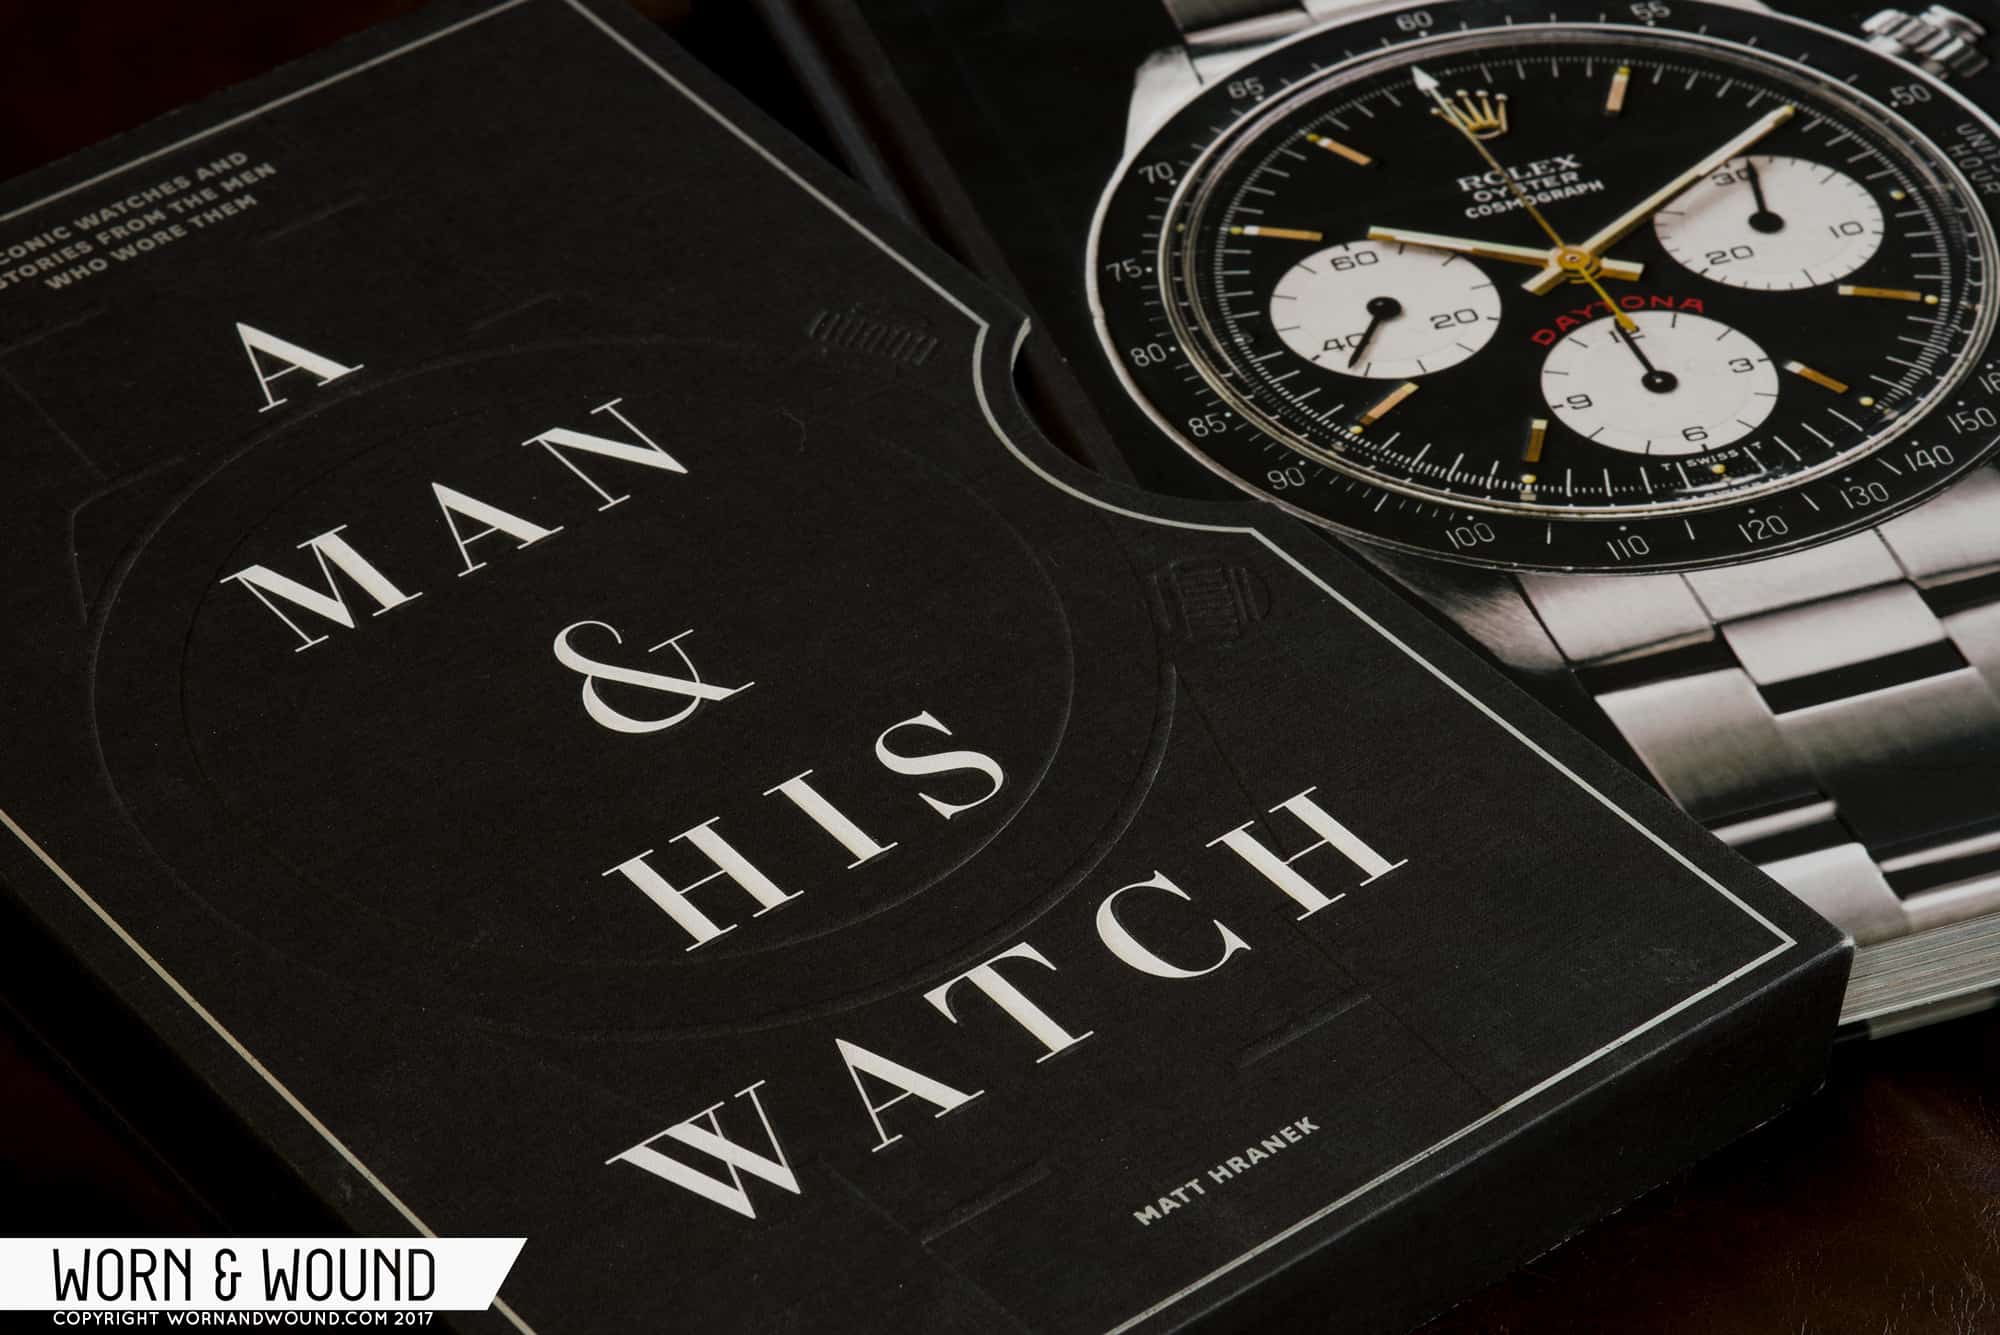 Review: ?A Man & His Watch? Can Make a Watch Lover Out of Anyone